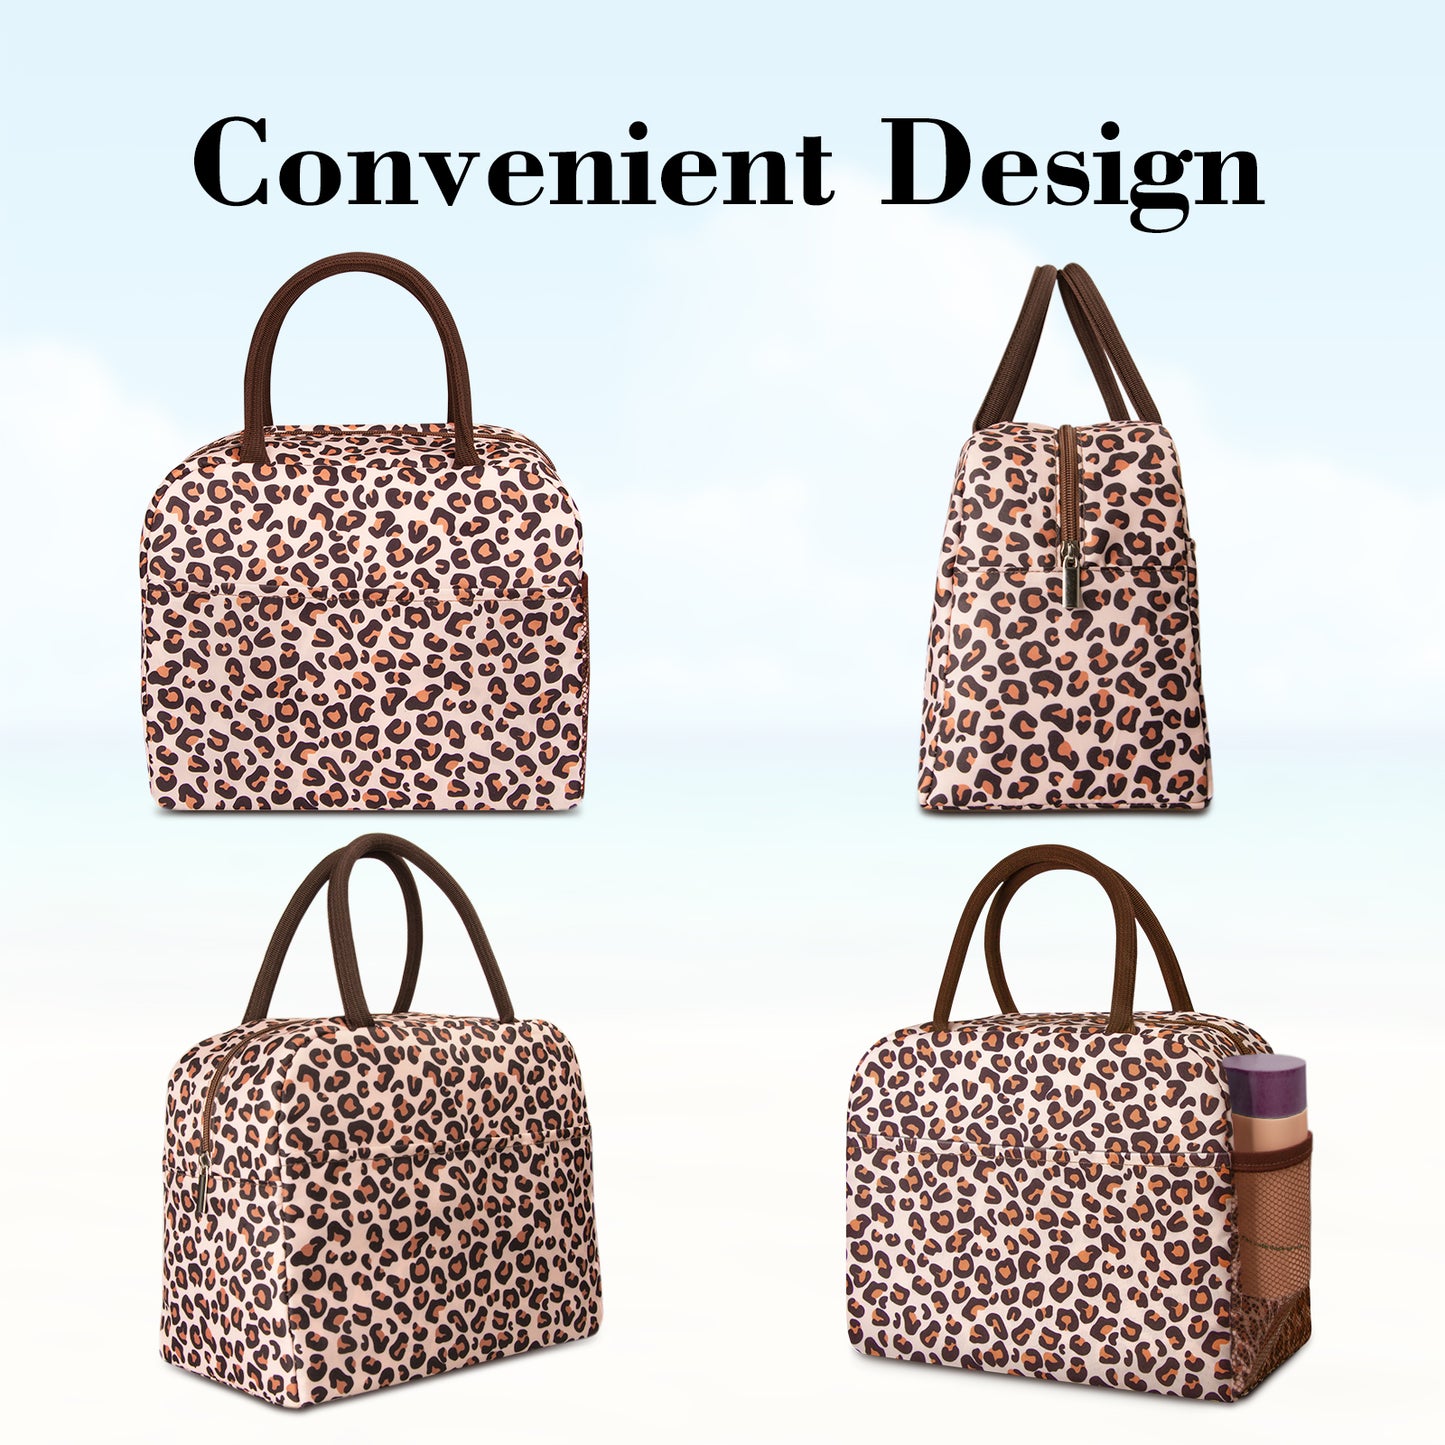 Lunch Bag Lunch Box for Women Men Reusable Insulated Lunch Tote Bag,Leakproof Thermal Cooler Sack Food Handbags Case High Capacity forTravel Work School Picnic-Leopard print